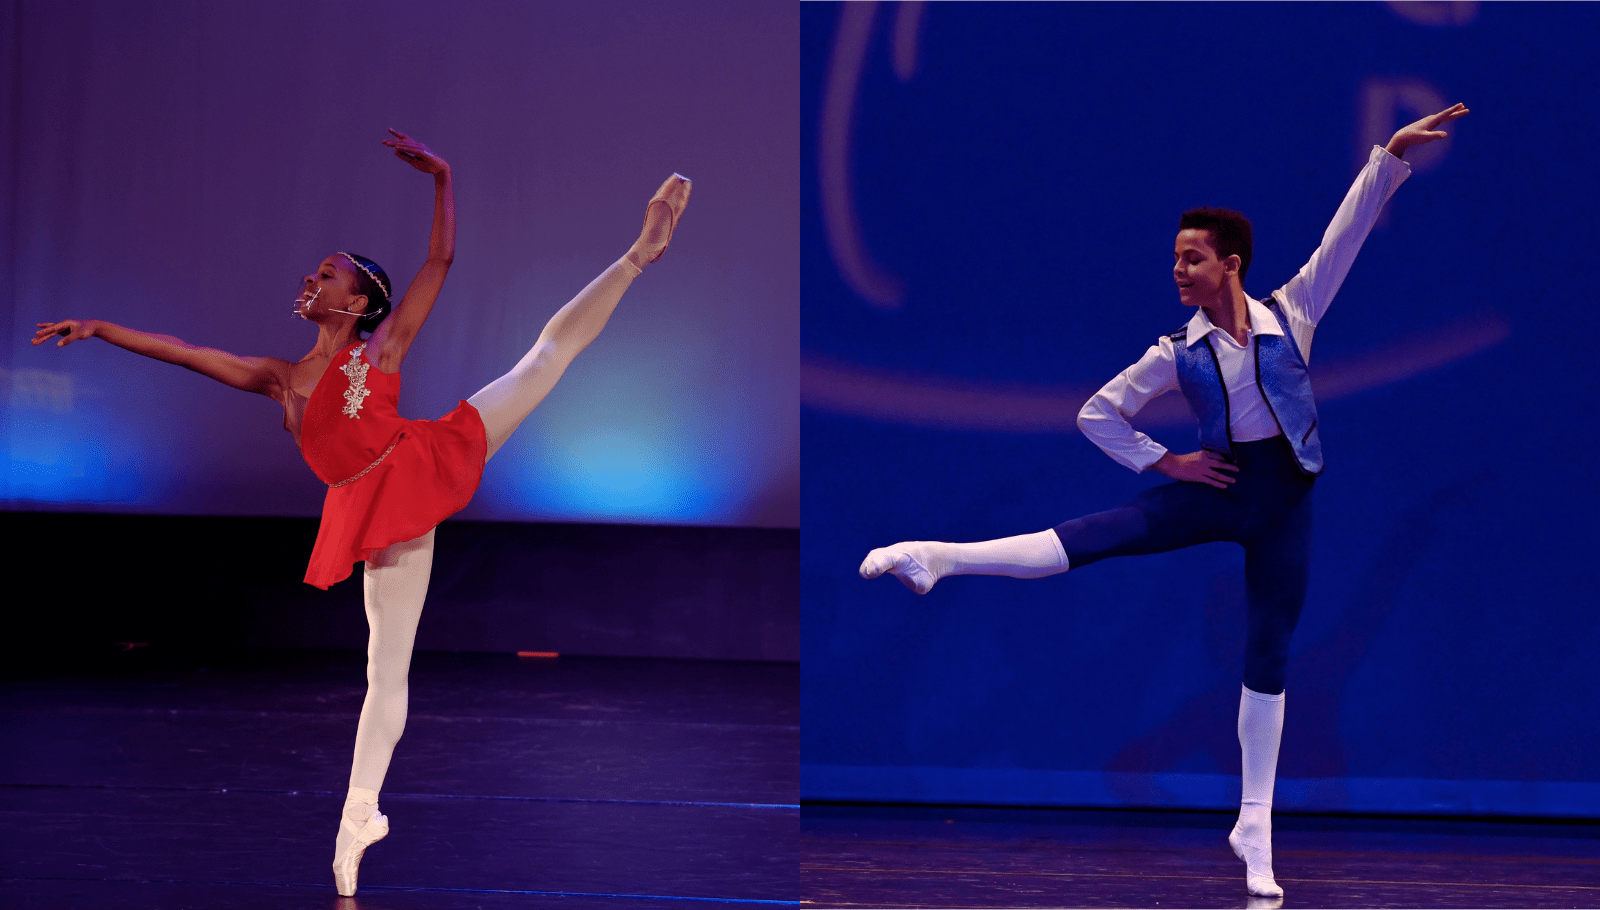 Image of two dancers performing ballet